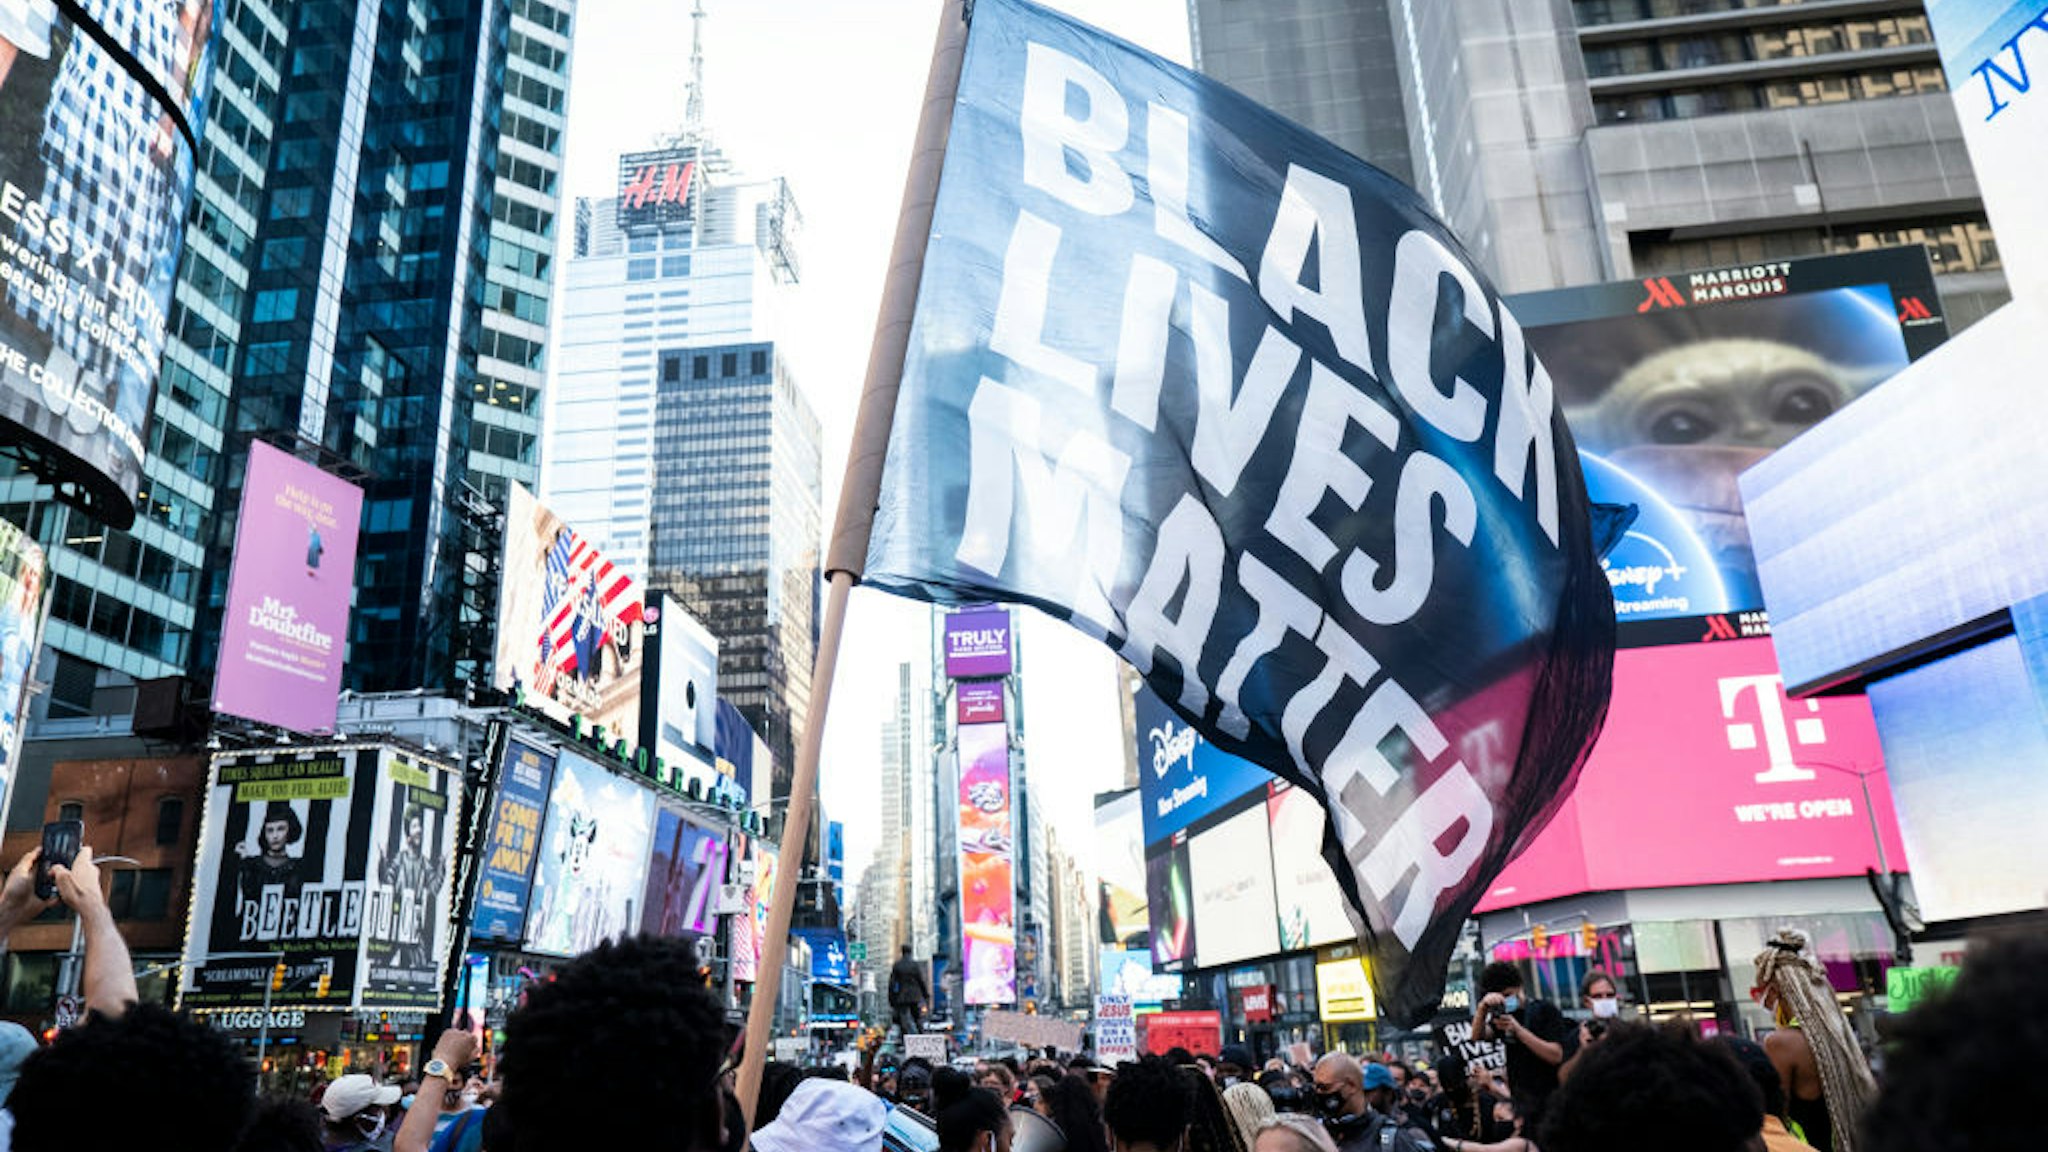 MANHATTAN, NY - July 26: A protester holds a large flag that says, "Black Lives Matter" which is draping the landscape of Times Square in New York. This non-violent protest was a March for Black Womxn which started at Times Square and walked through Manhattan. This is days after Portland and other cities have seen federal agents have taken protesters and put into unmarked vehicles while others have been beaten and pepper sprayed. Protesters continue taking to the streets across America and around the world after the killing of George Floyd at the hands of a white police officer Derek Chauvin that was kneeling on his neck during for eight minutes, was caught on video and went viral. During his arrest as Floyd pleaded, "I Can't Breathe". The protest are attempting to give a voice to the need for human rights for African American's and to stop police brutality against people of color. They are also protesting deep-seated racism in America. Many people were wearing masks and observing social distancing due to the coronavirus pandemic. Photographed in the Manhattan Borough of New York on July 26, 2020, USA.